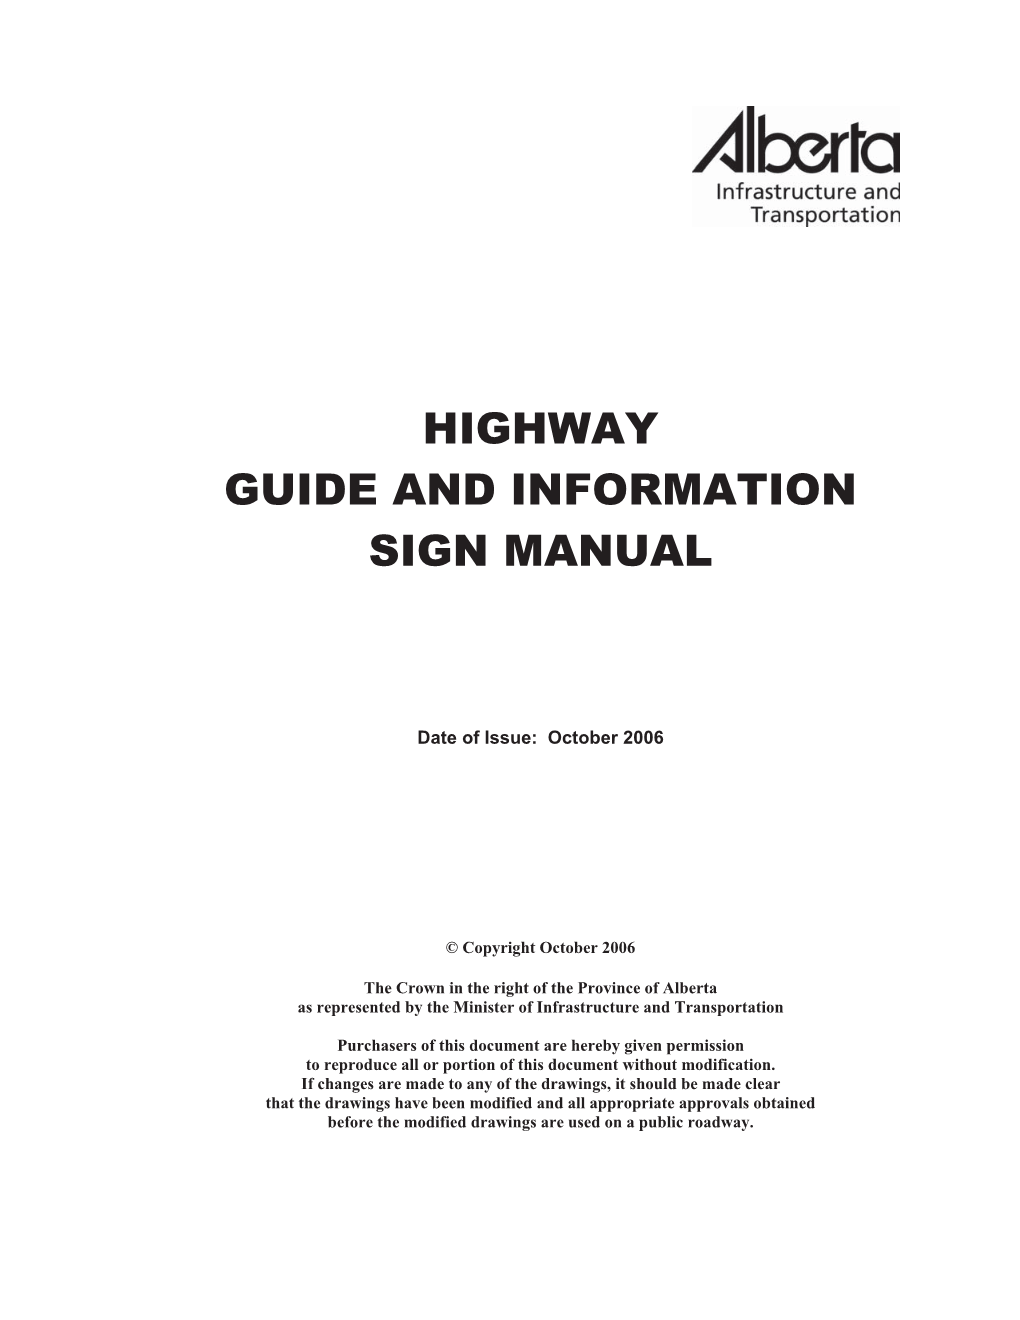 Highway Guide and Information Sign Manual